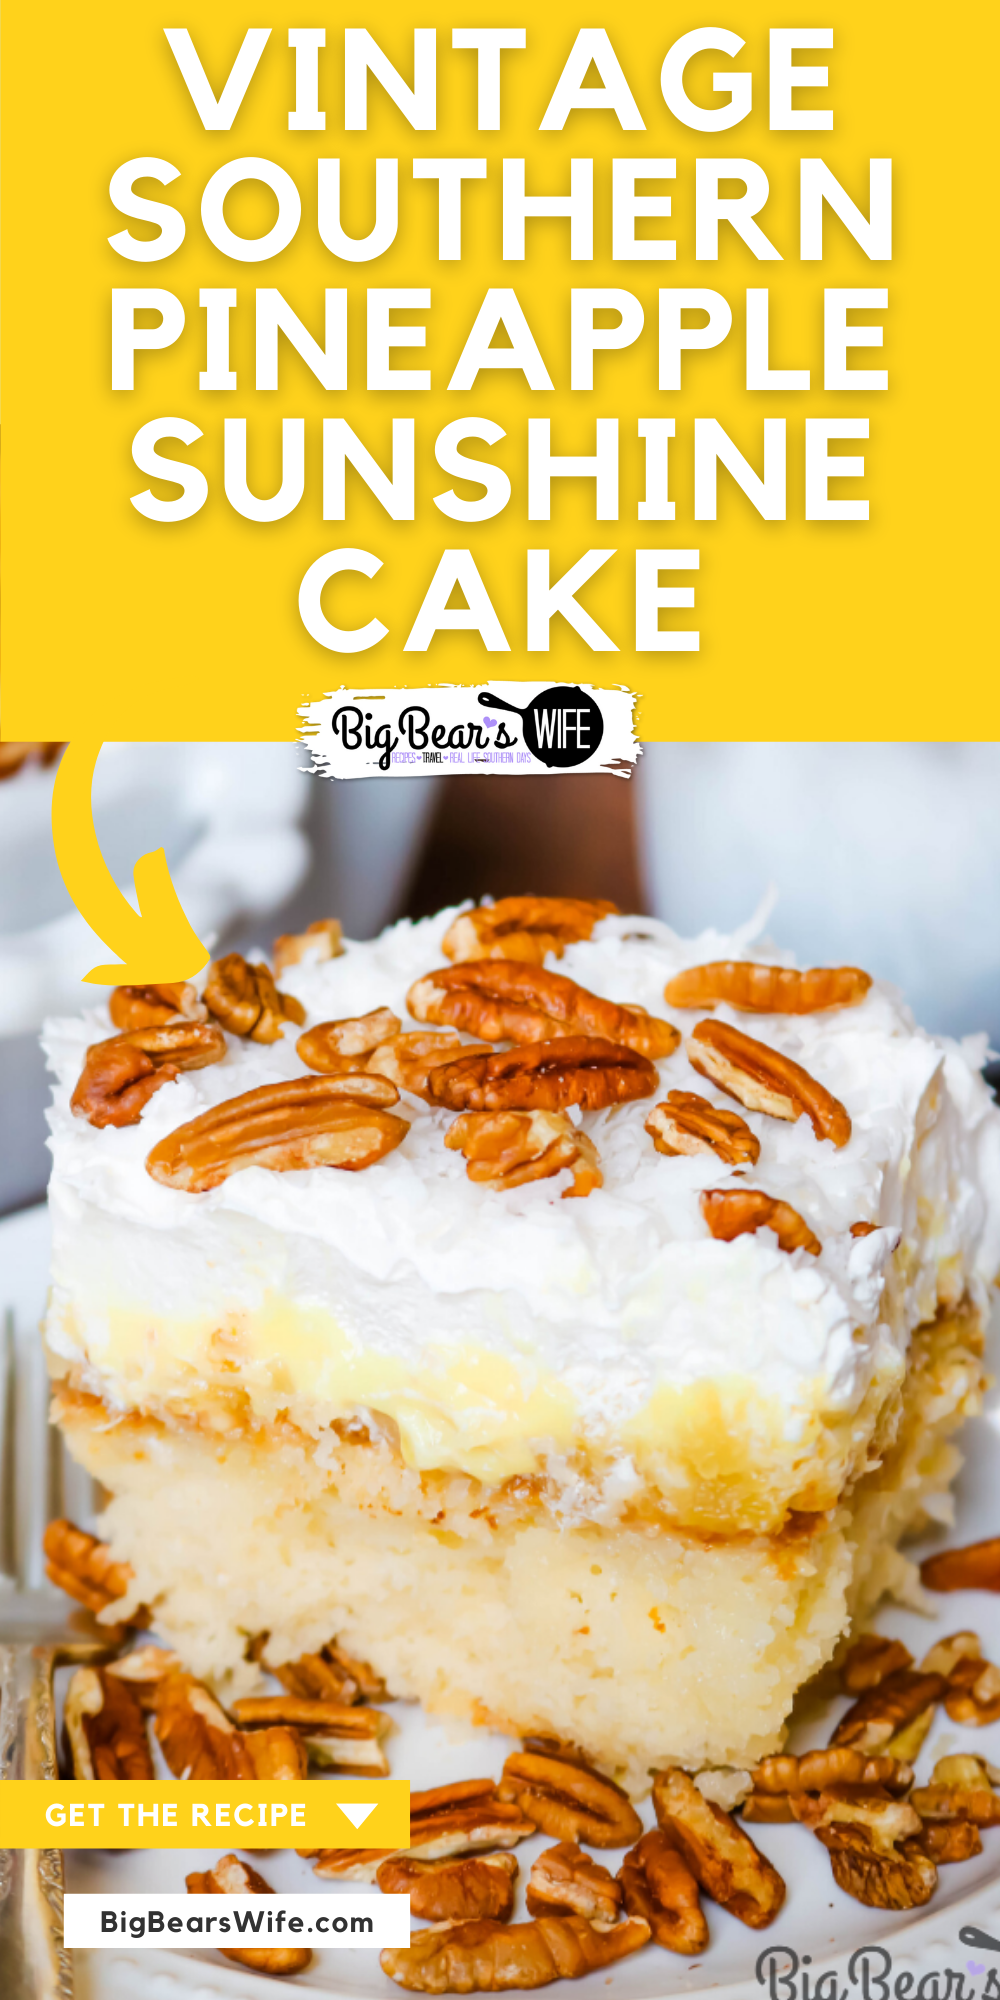 This Southern Pineapple Sunshine Cake is a doctored cake mix cake with pineapples, cool whip, coconut and pecans!  via @bigbearswife